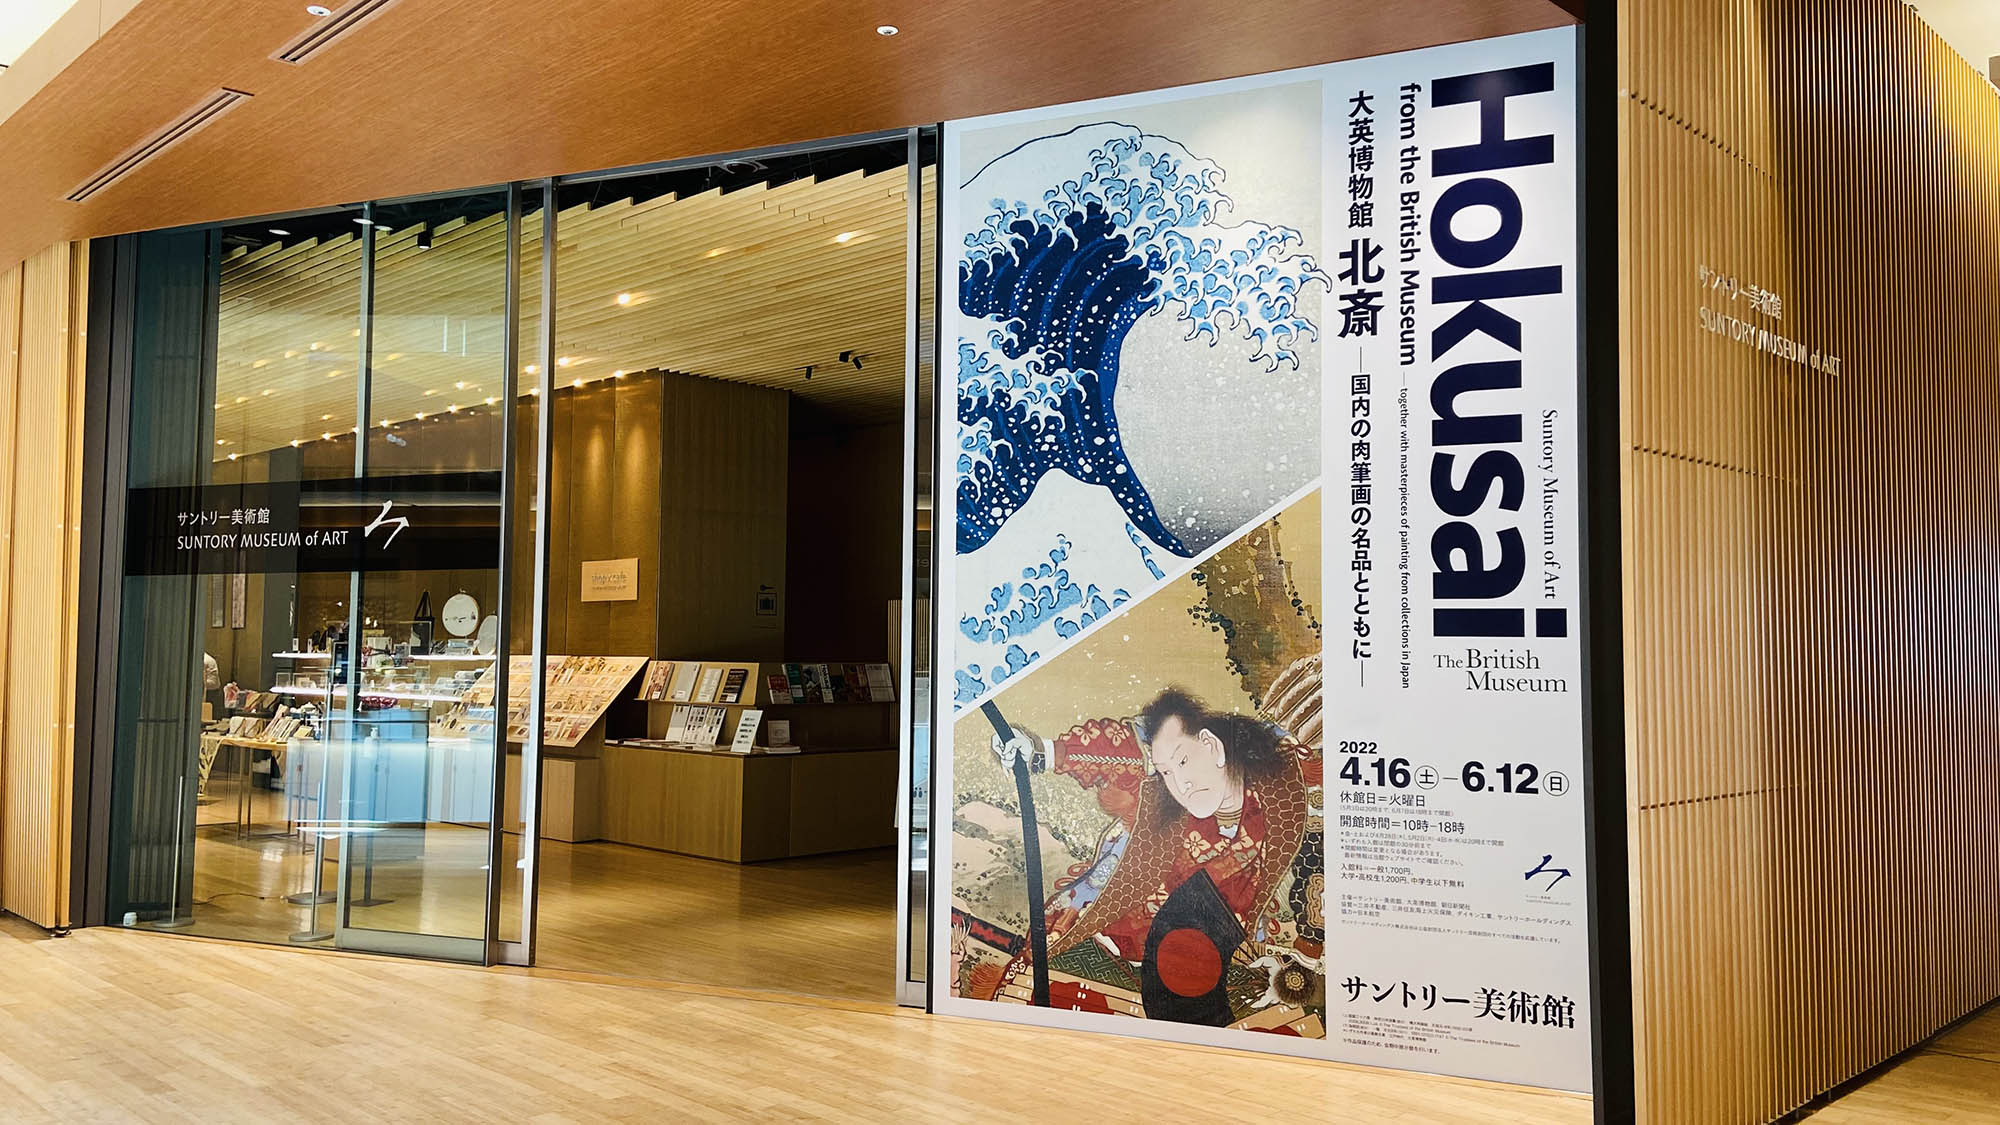 SuntoryMuseumofArt on X: Our first #Hokusai exhibition Hokusai from the British  Museum―together with masterpieces of painting from collections in Japan  #大英博物館北斎展 is now open! @britishmuseum    / X